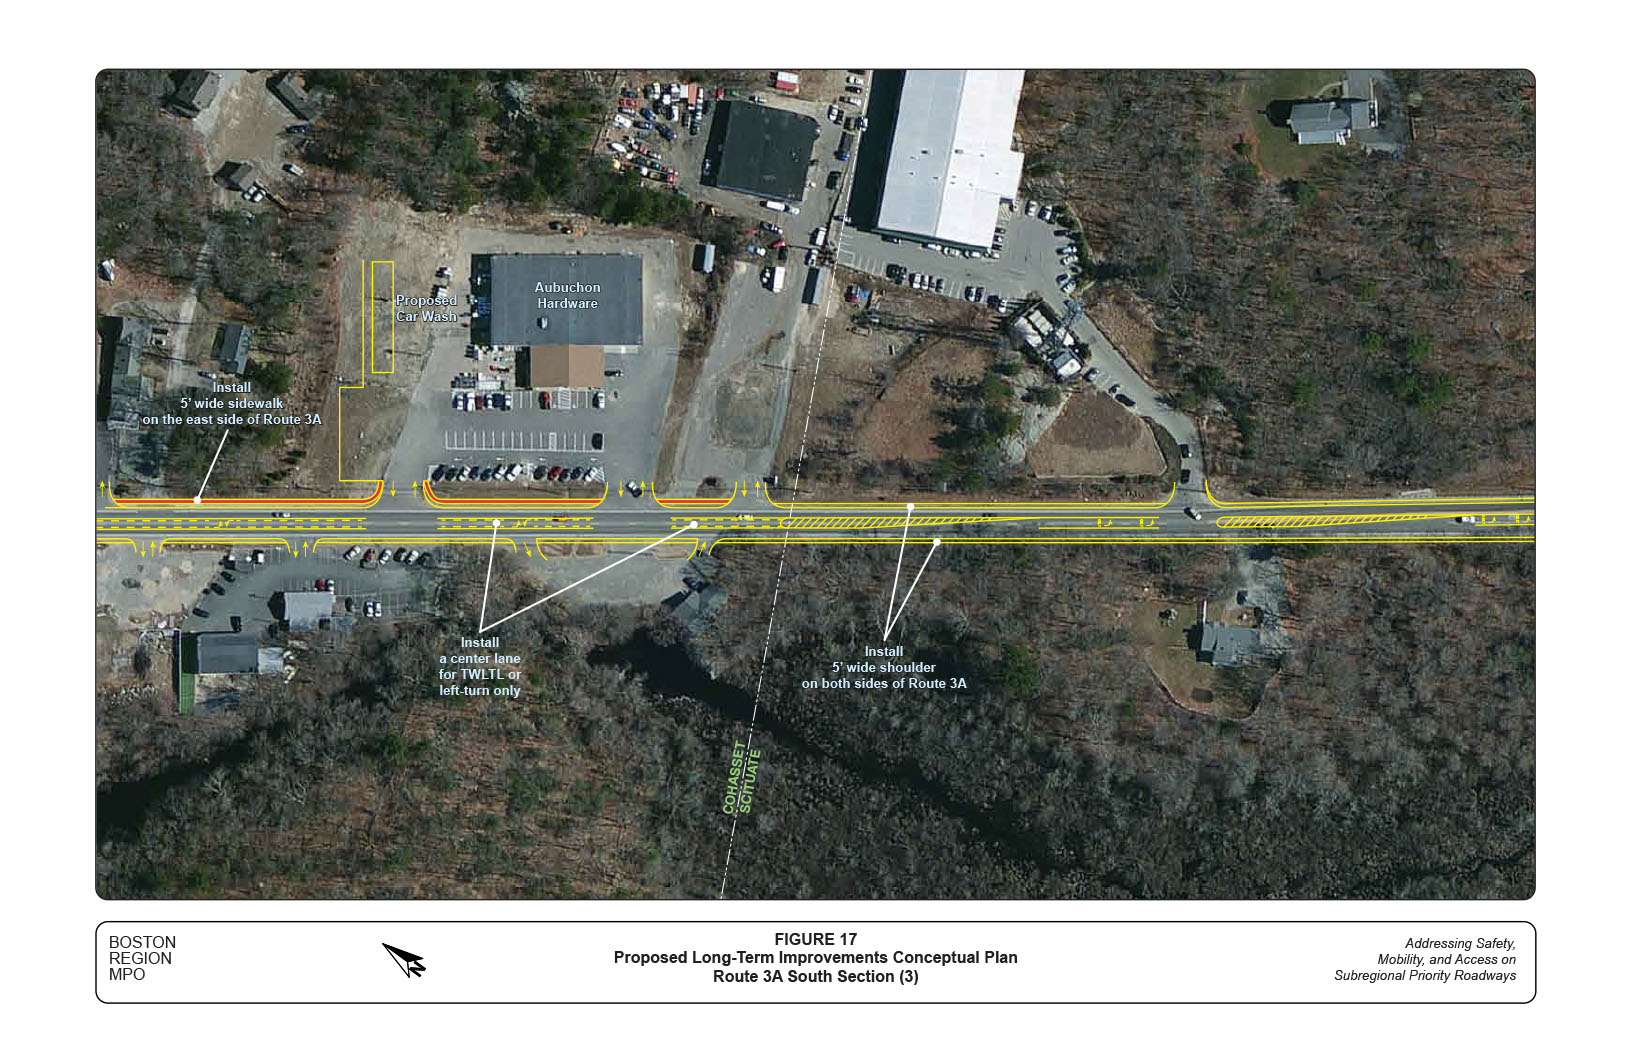 Figure 17 is an aerial view map that depicts further proposed long-term improvements (conceptual plan) for the south section of Route 3A.